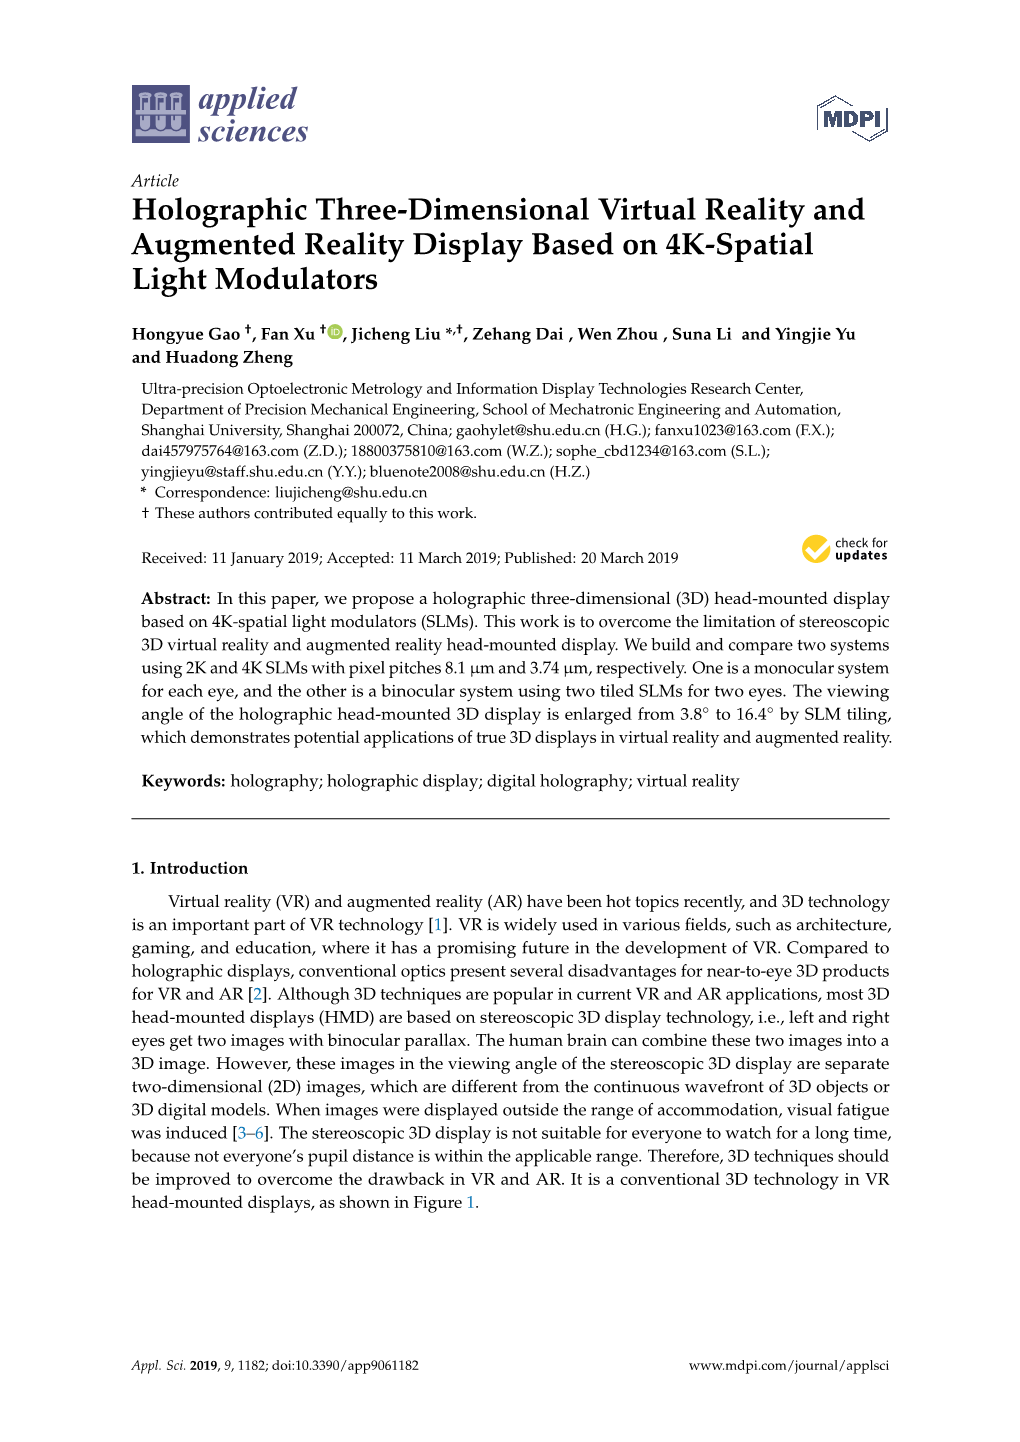 Holographic Three-Dimensional Virtual Reality and Augmented Reality Display Based on 4K-Spatial Light Modulators